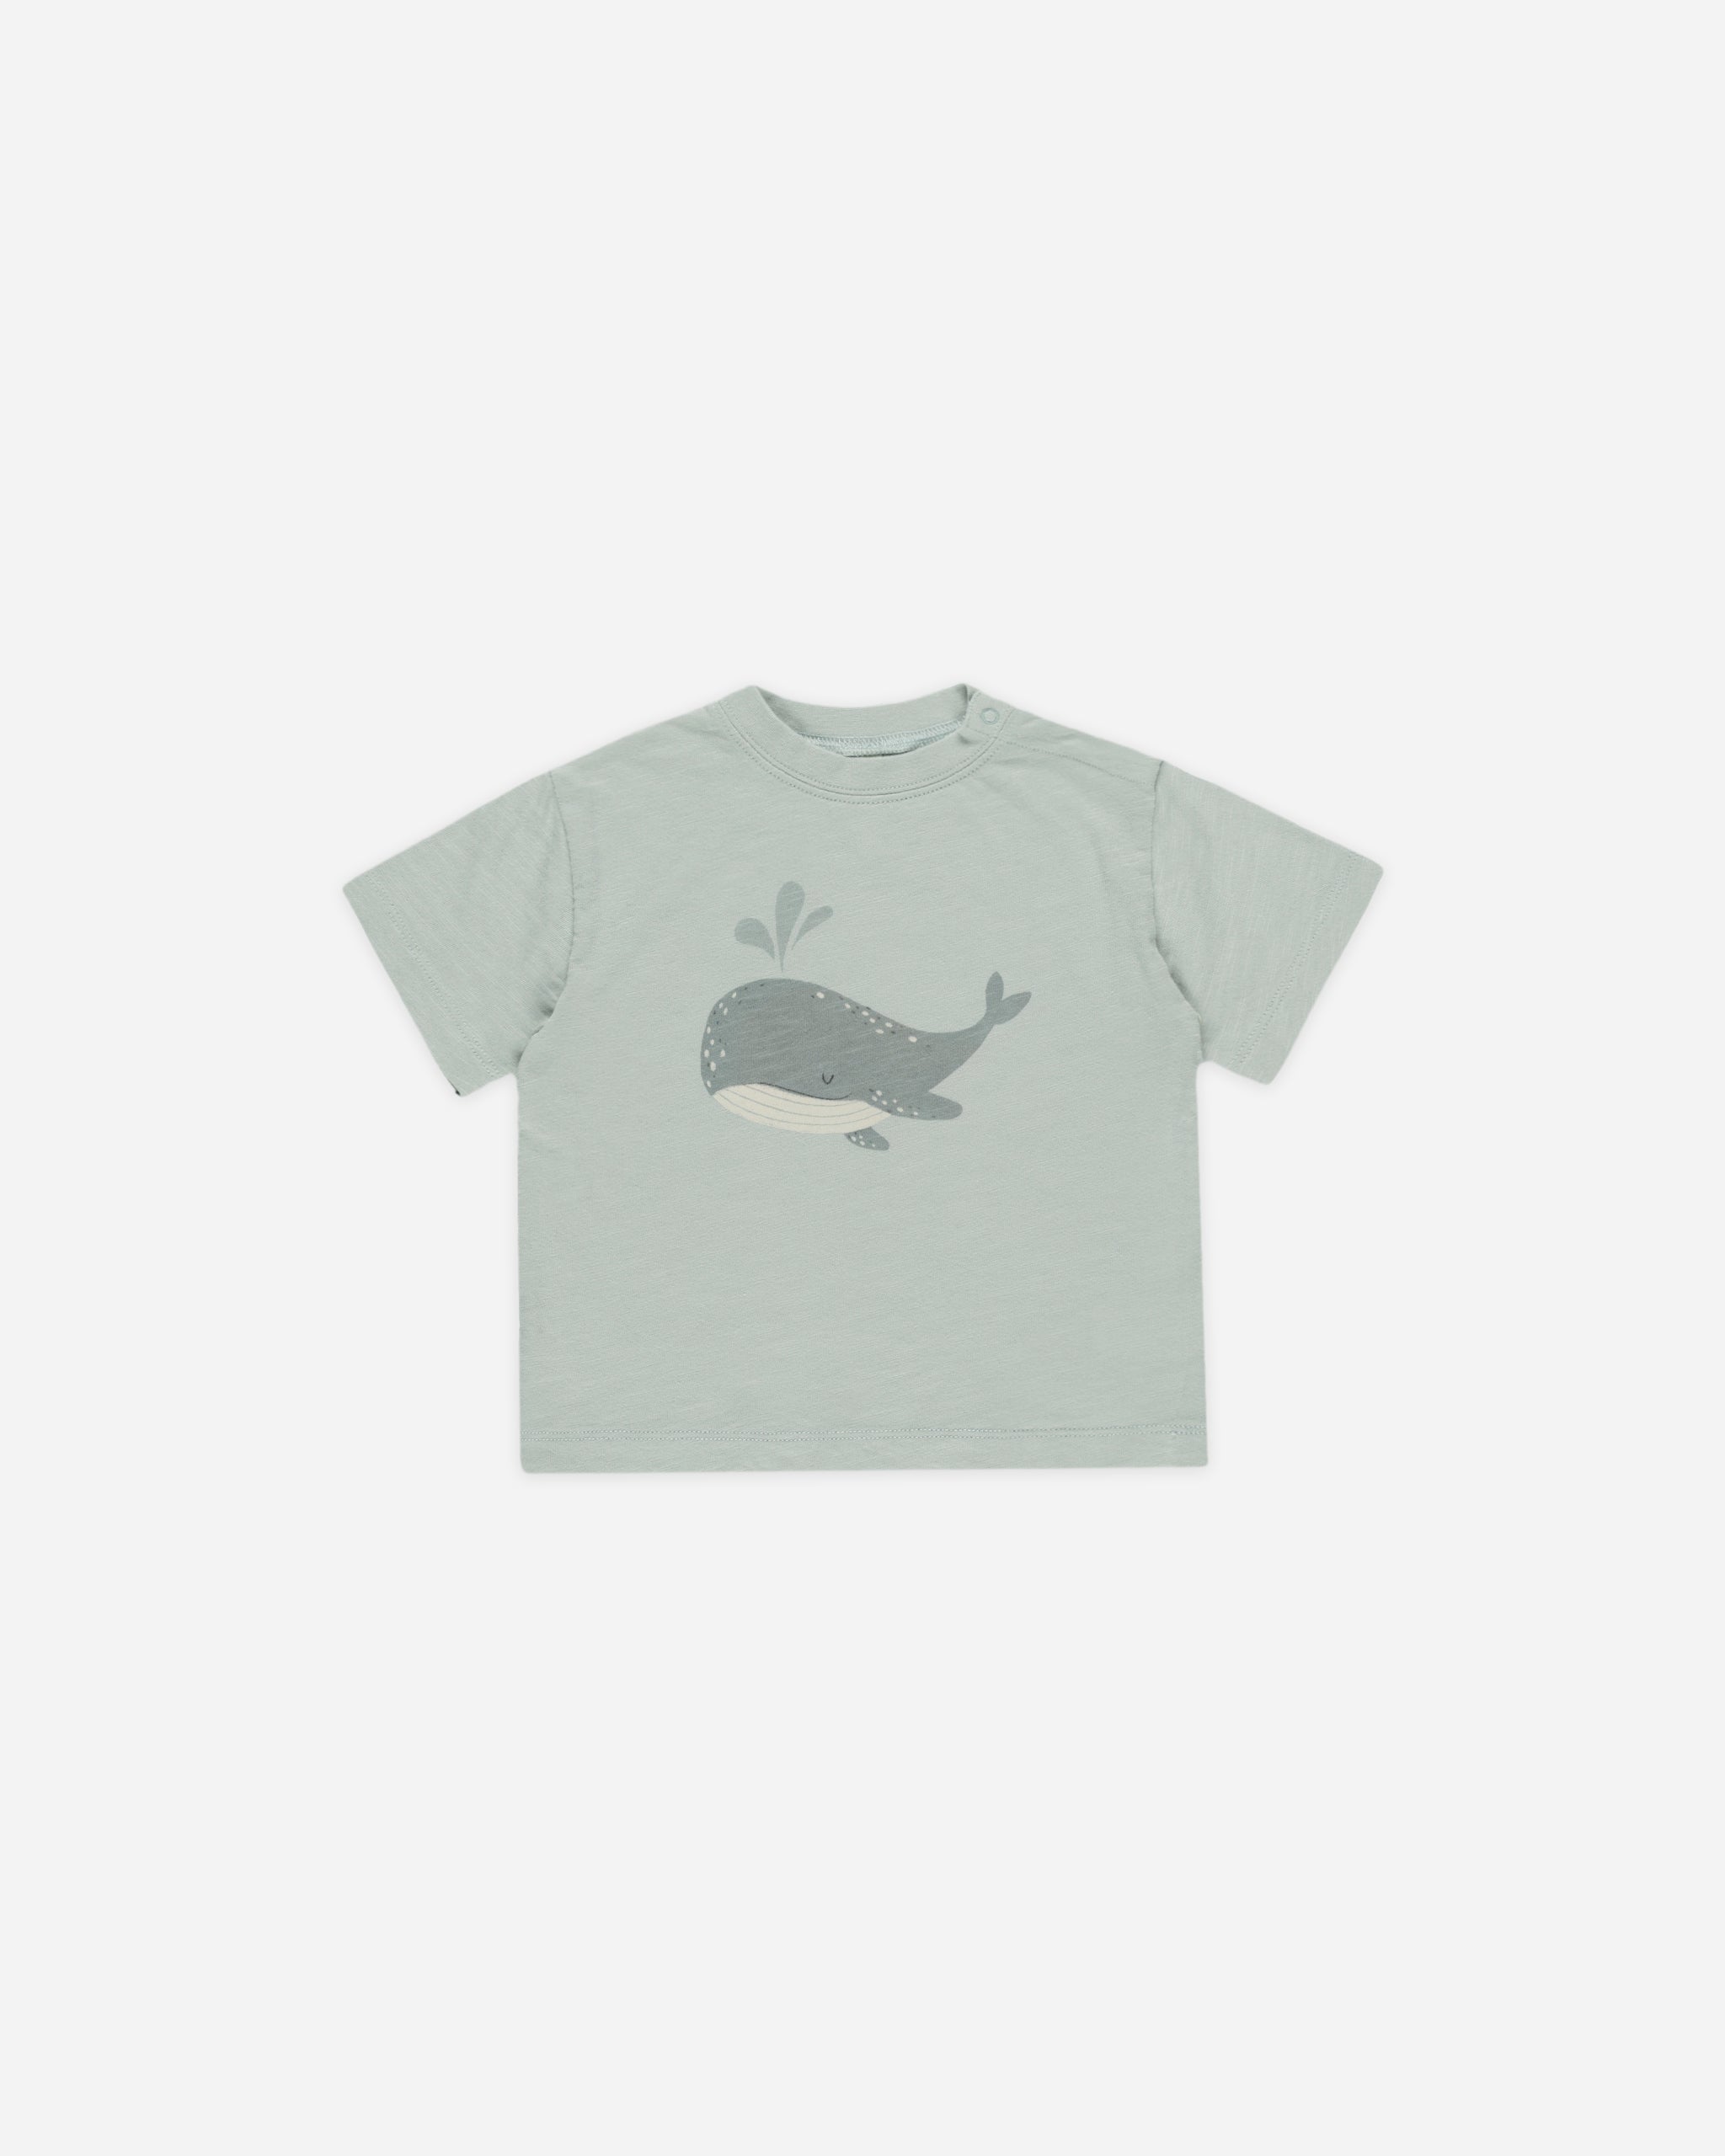 Relaxed Tee || Whale - Rylee + Cru | Kids Clothes | Trendy Baby Clothes | Modern Infant Outfits |